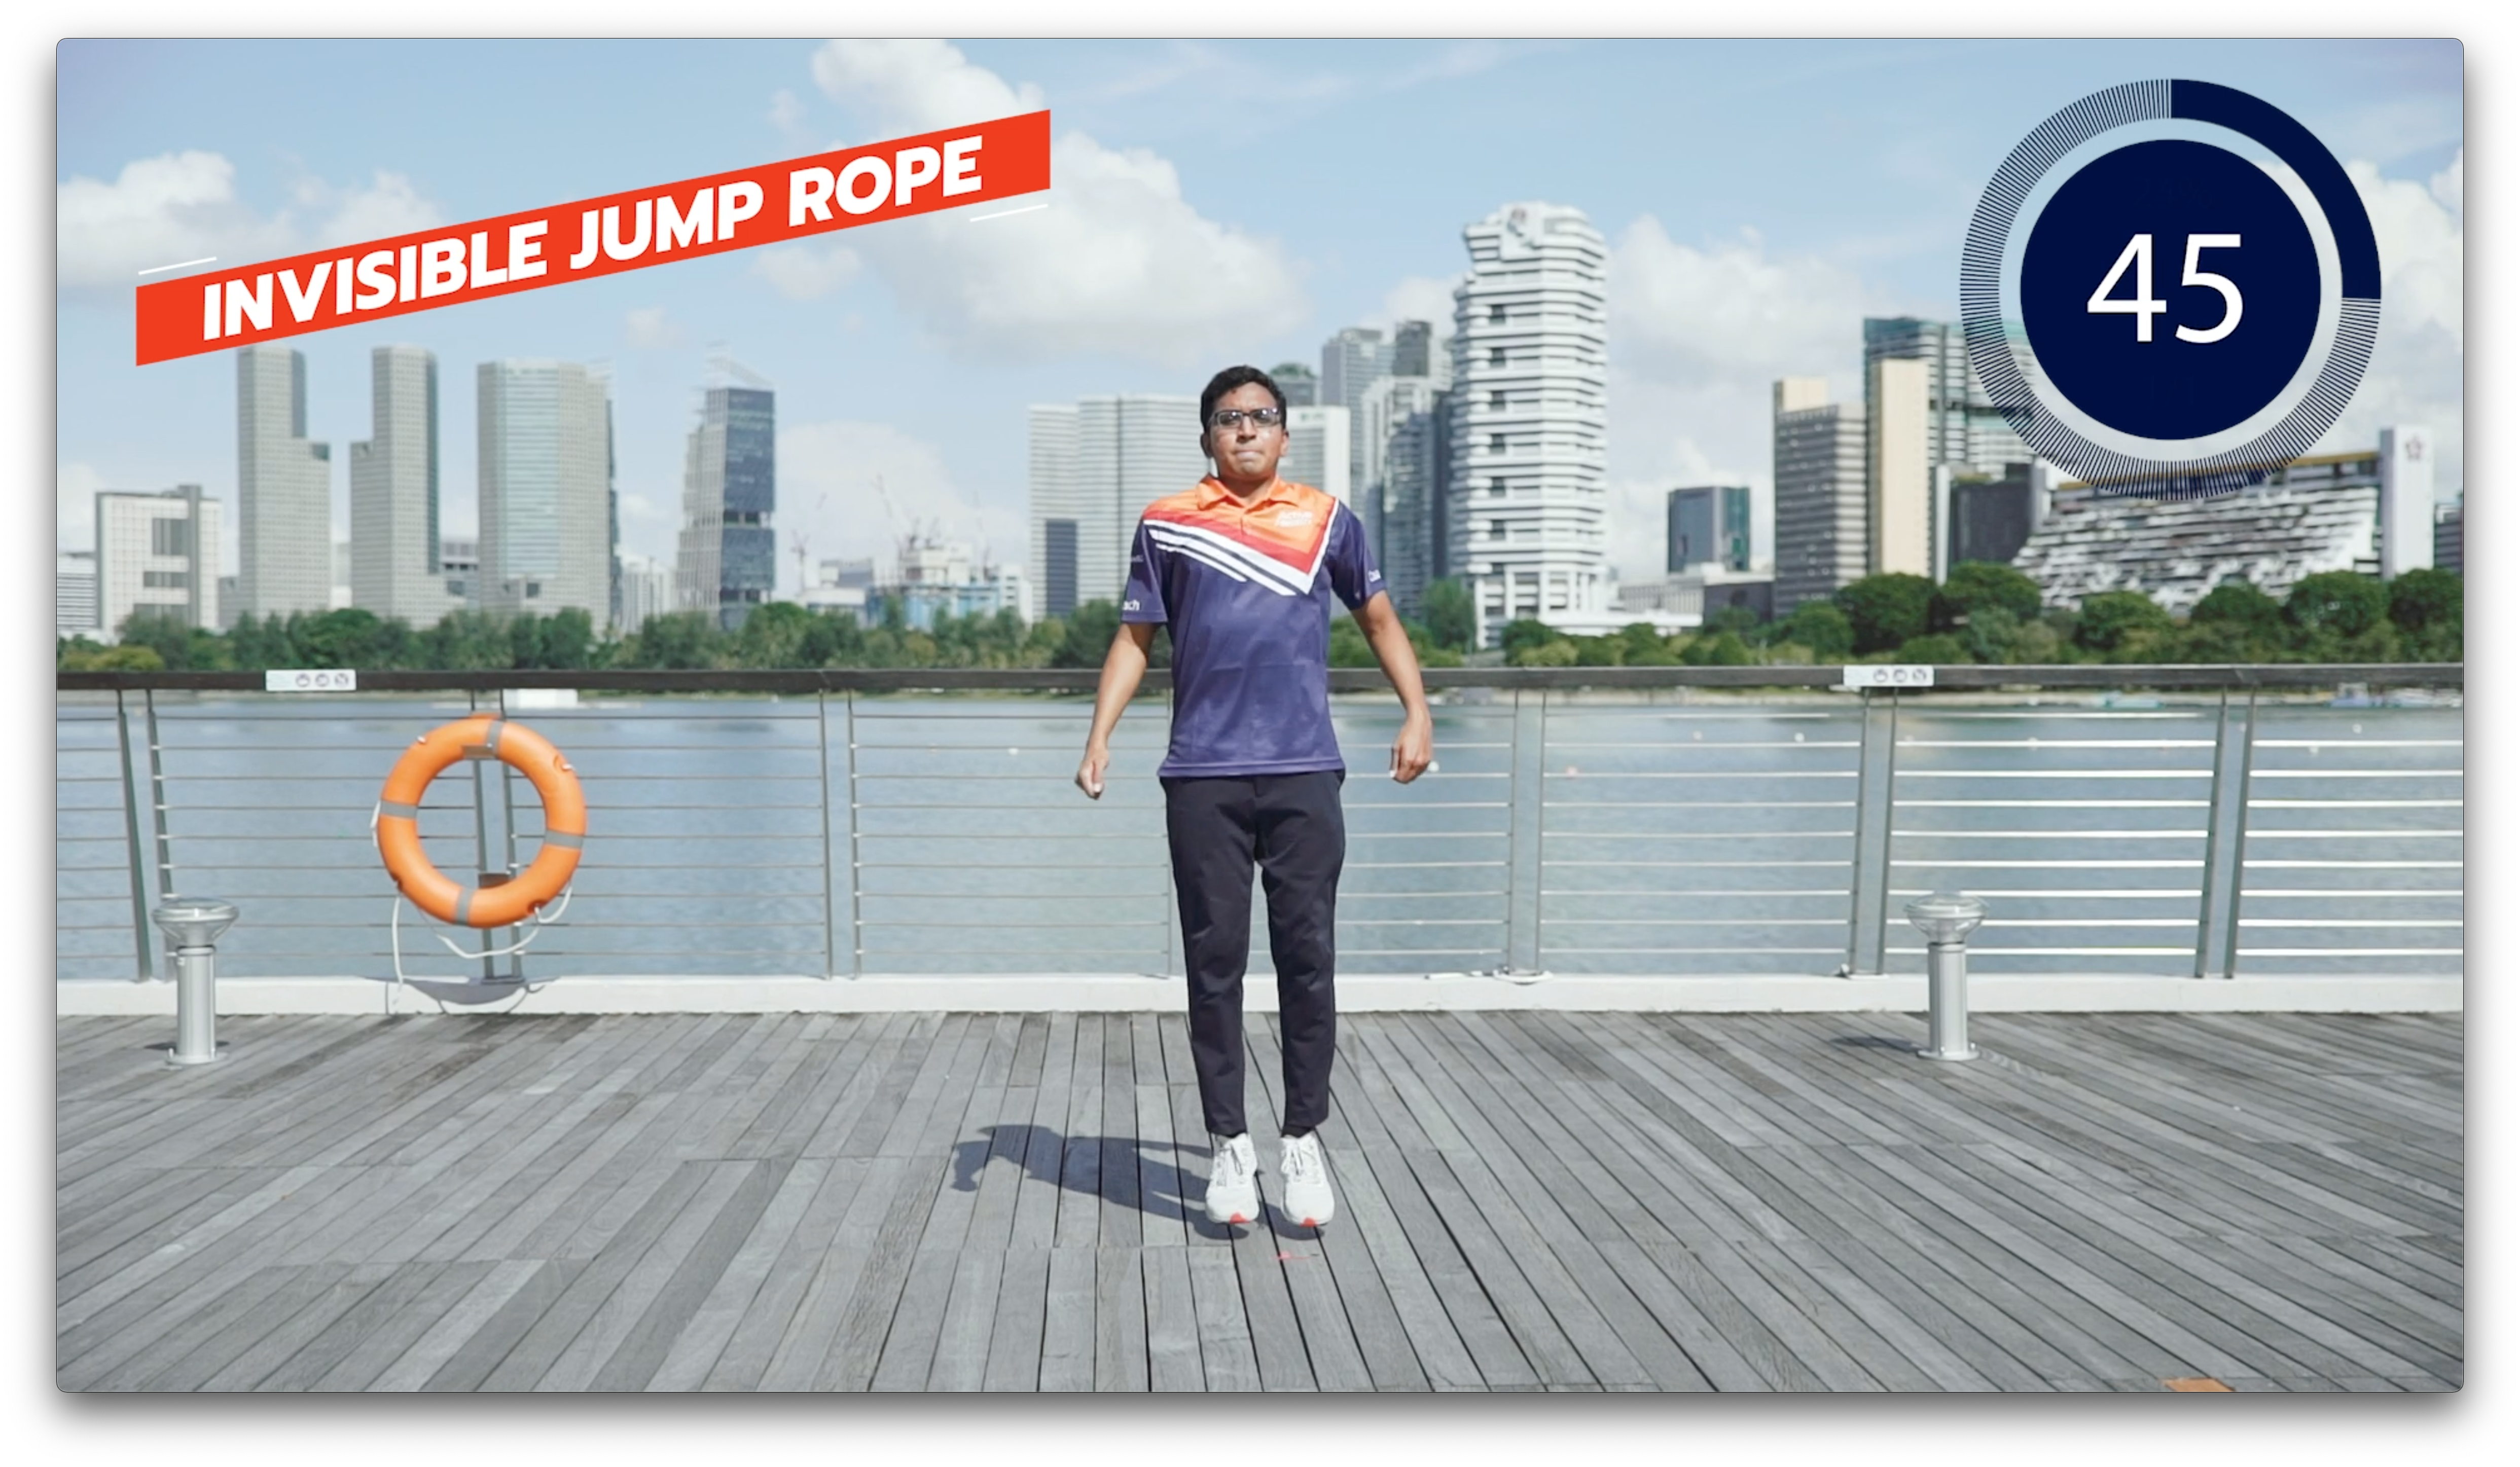 Invisble Jump Rope